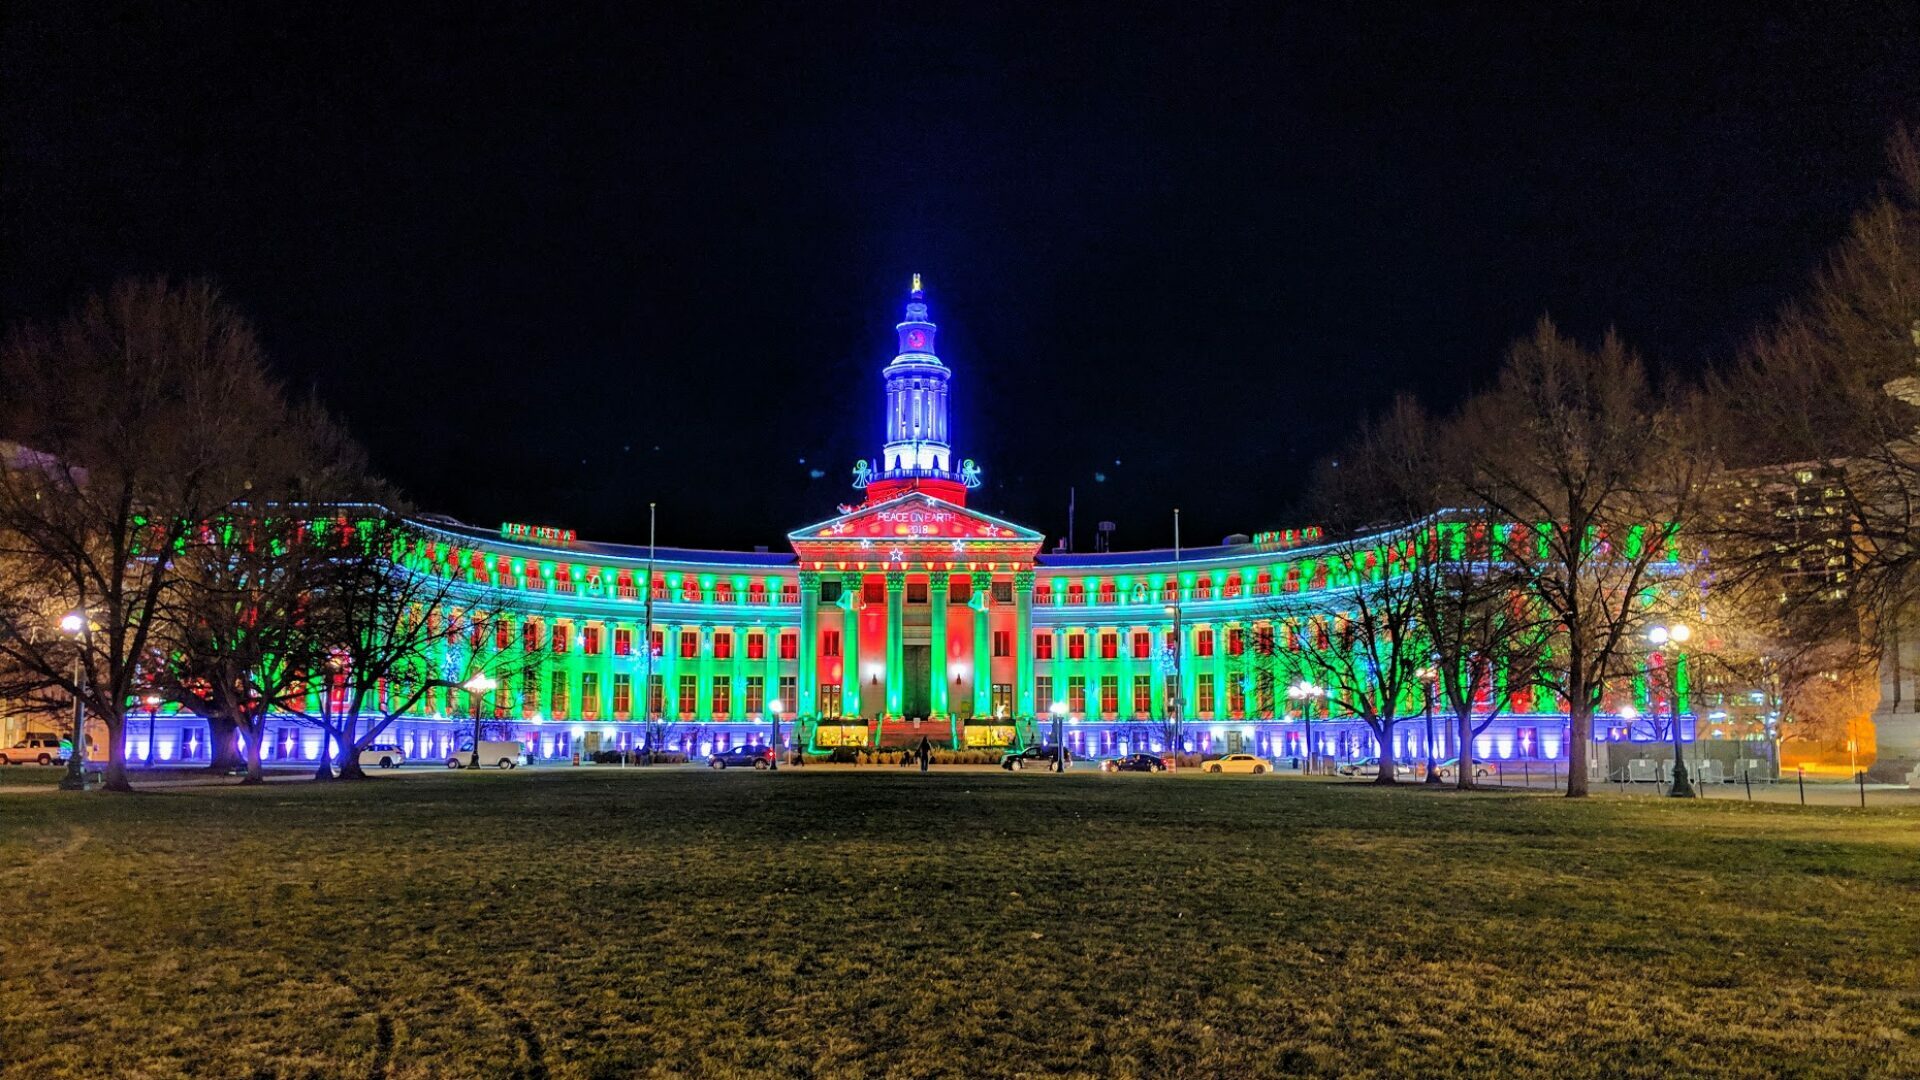 City and County of Denver building lit up at night time